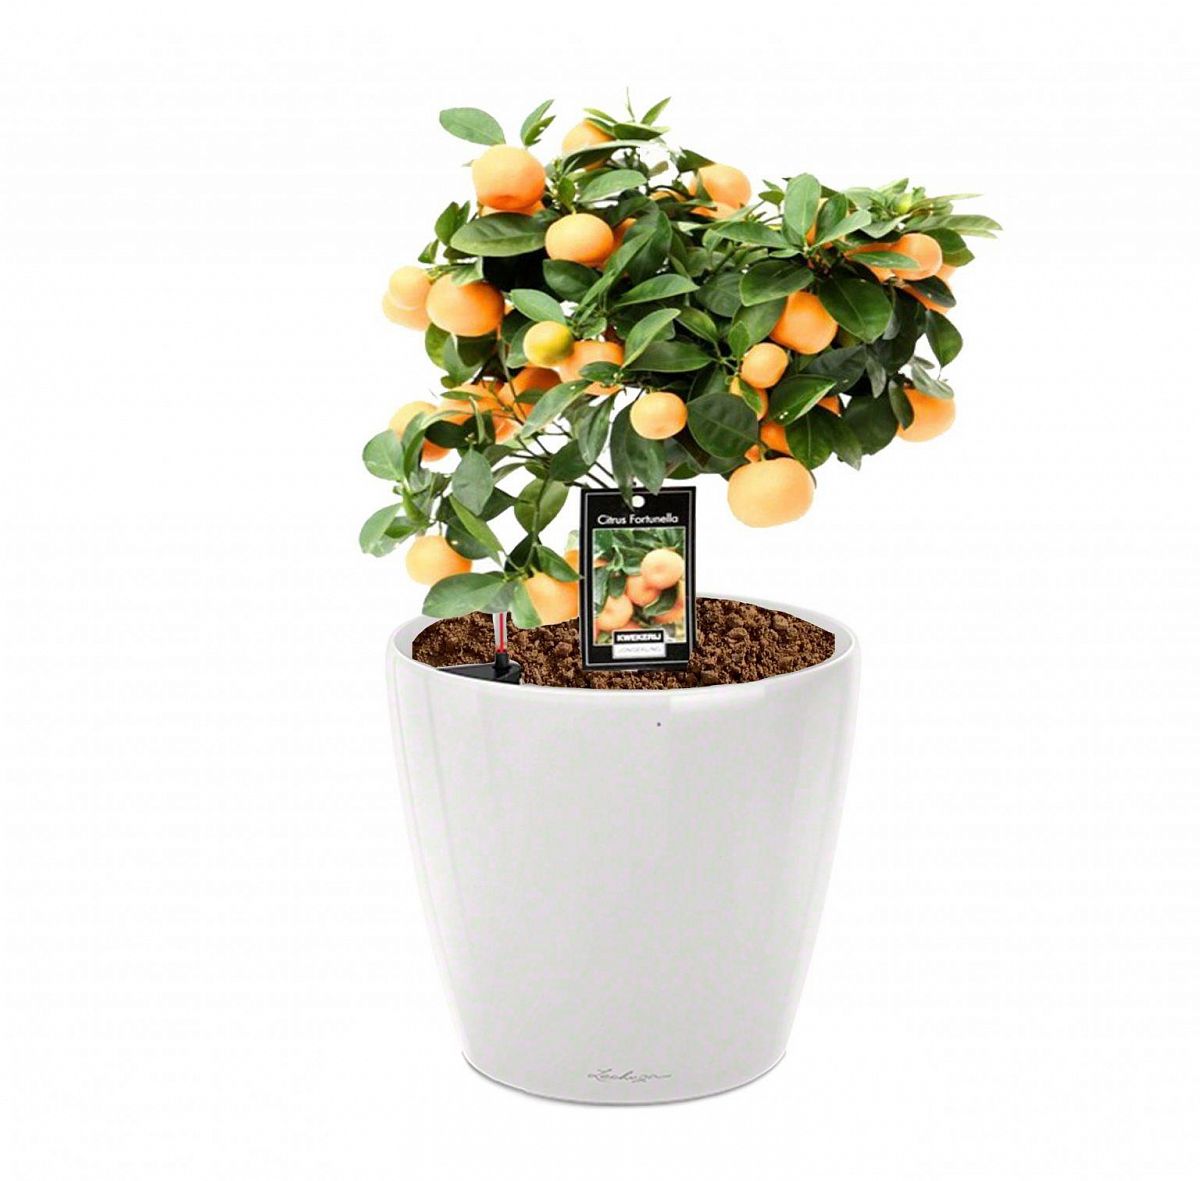 Tangerine Tree in LECHUZA CLASSICO LS Self-watering Planter, Total Height 50 cm